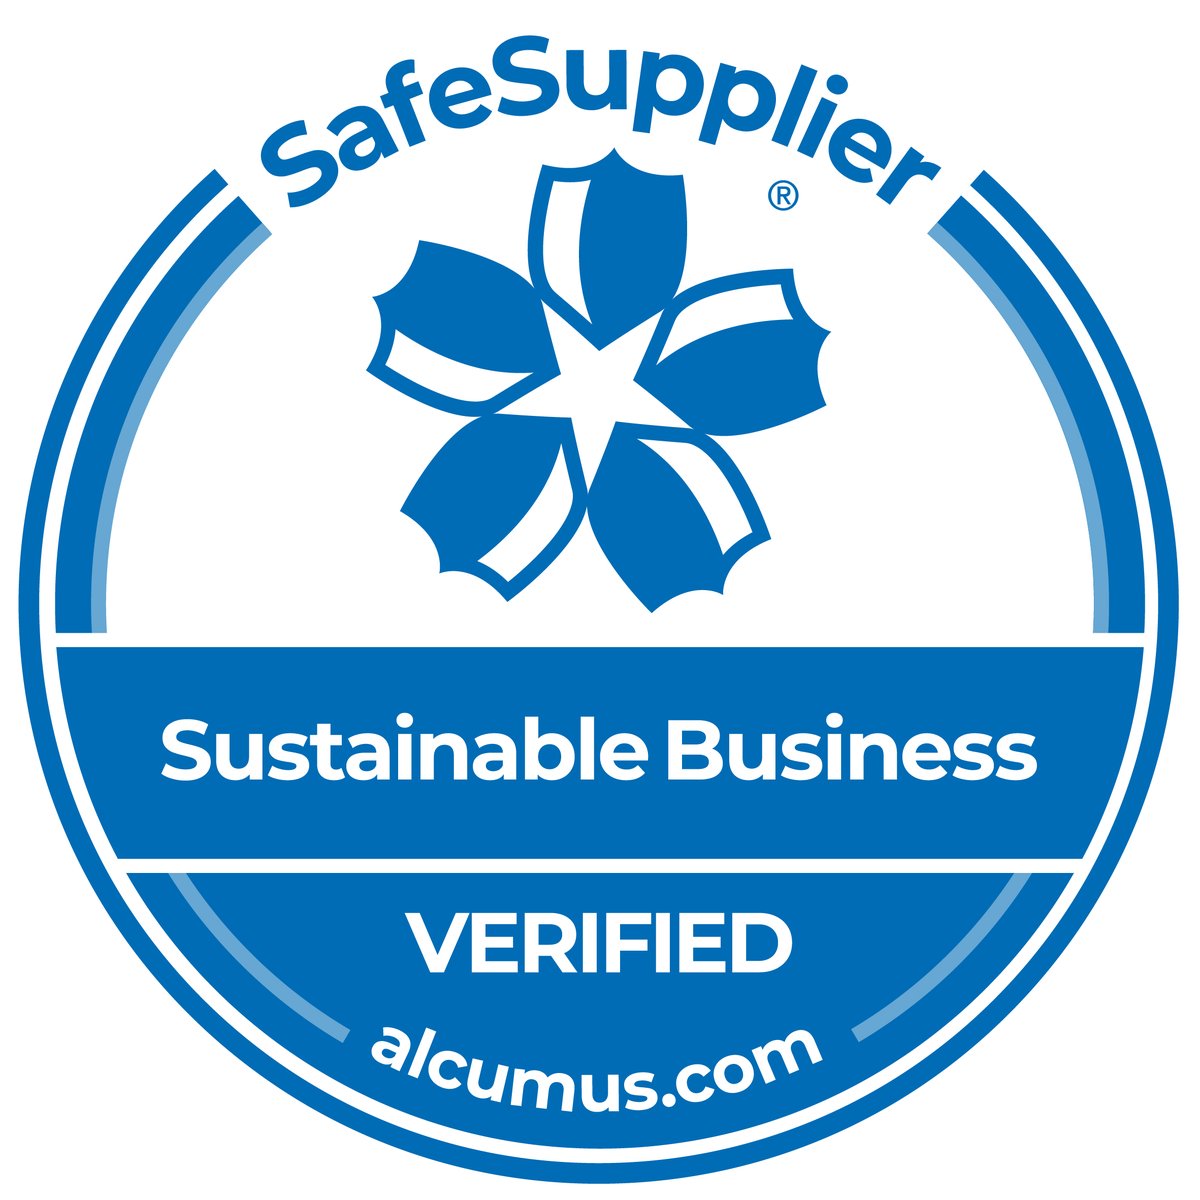 CNT have achieved SafeSupplier Status as verified by Alcumus. Being SafeSupplier verified allows suppliers to present their credentials across a range of topics, helping buying organisations select reputable companies for ongoing work. #quality #qualitymark #qualitybusiness